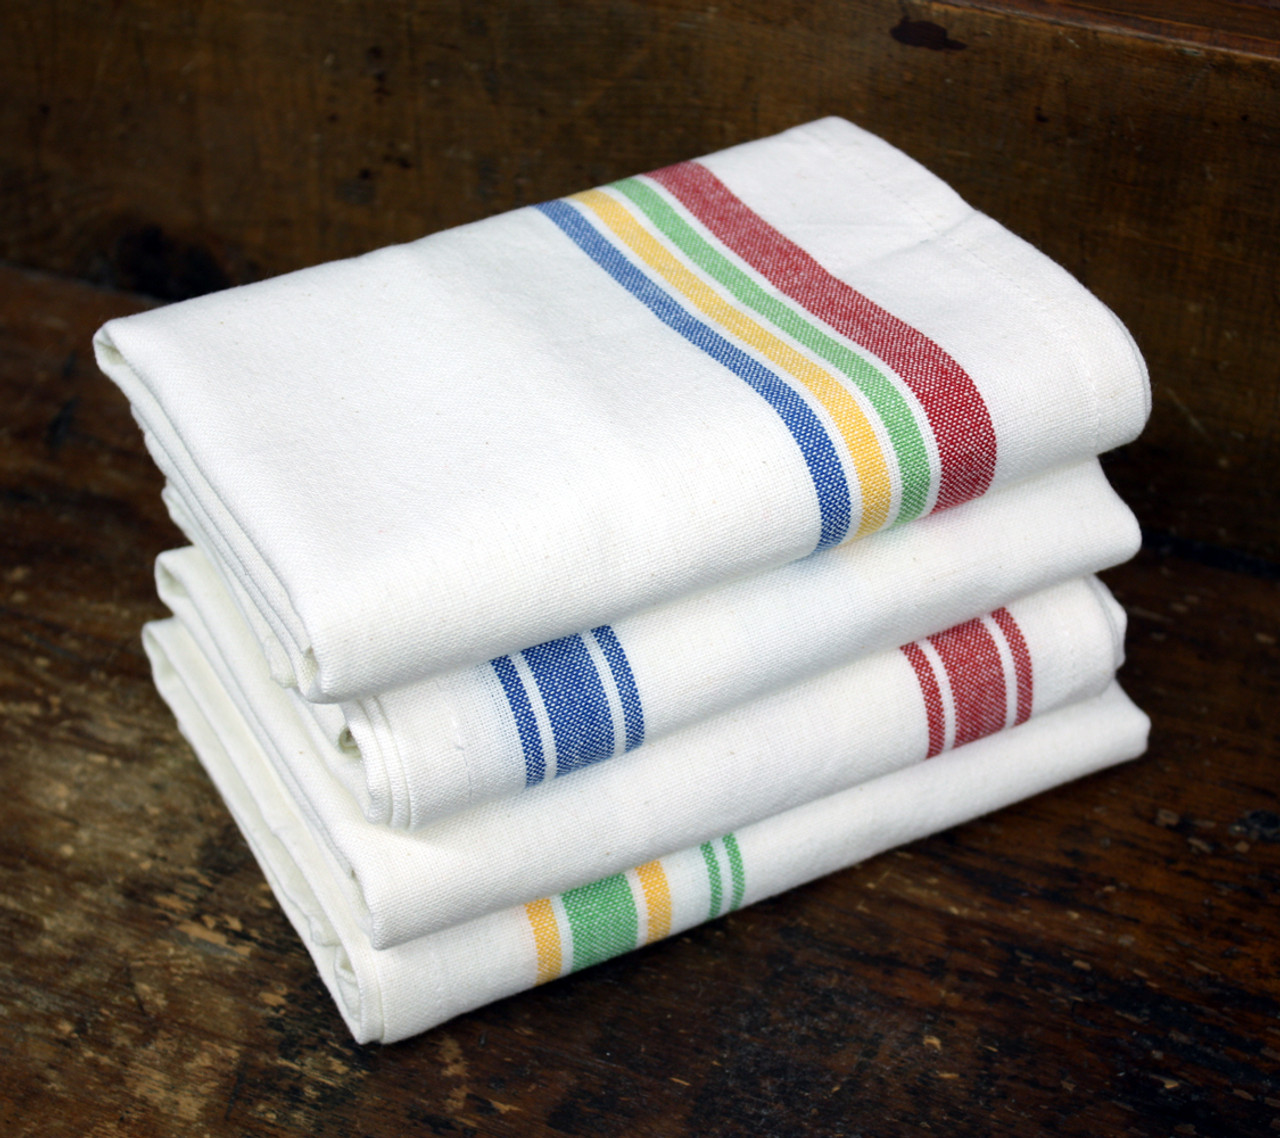 https://cdn11.bigcommerce.com/s-qlw1zct7w/images/stencil/1280x1280/products/2367/10235/Vintage_Stripe_Towel_Sampler_Set__51916.1498769540.jpg?c=2?imbypass=on